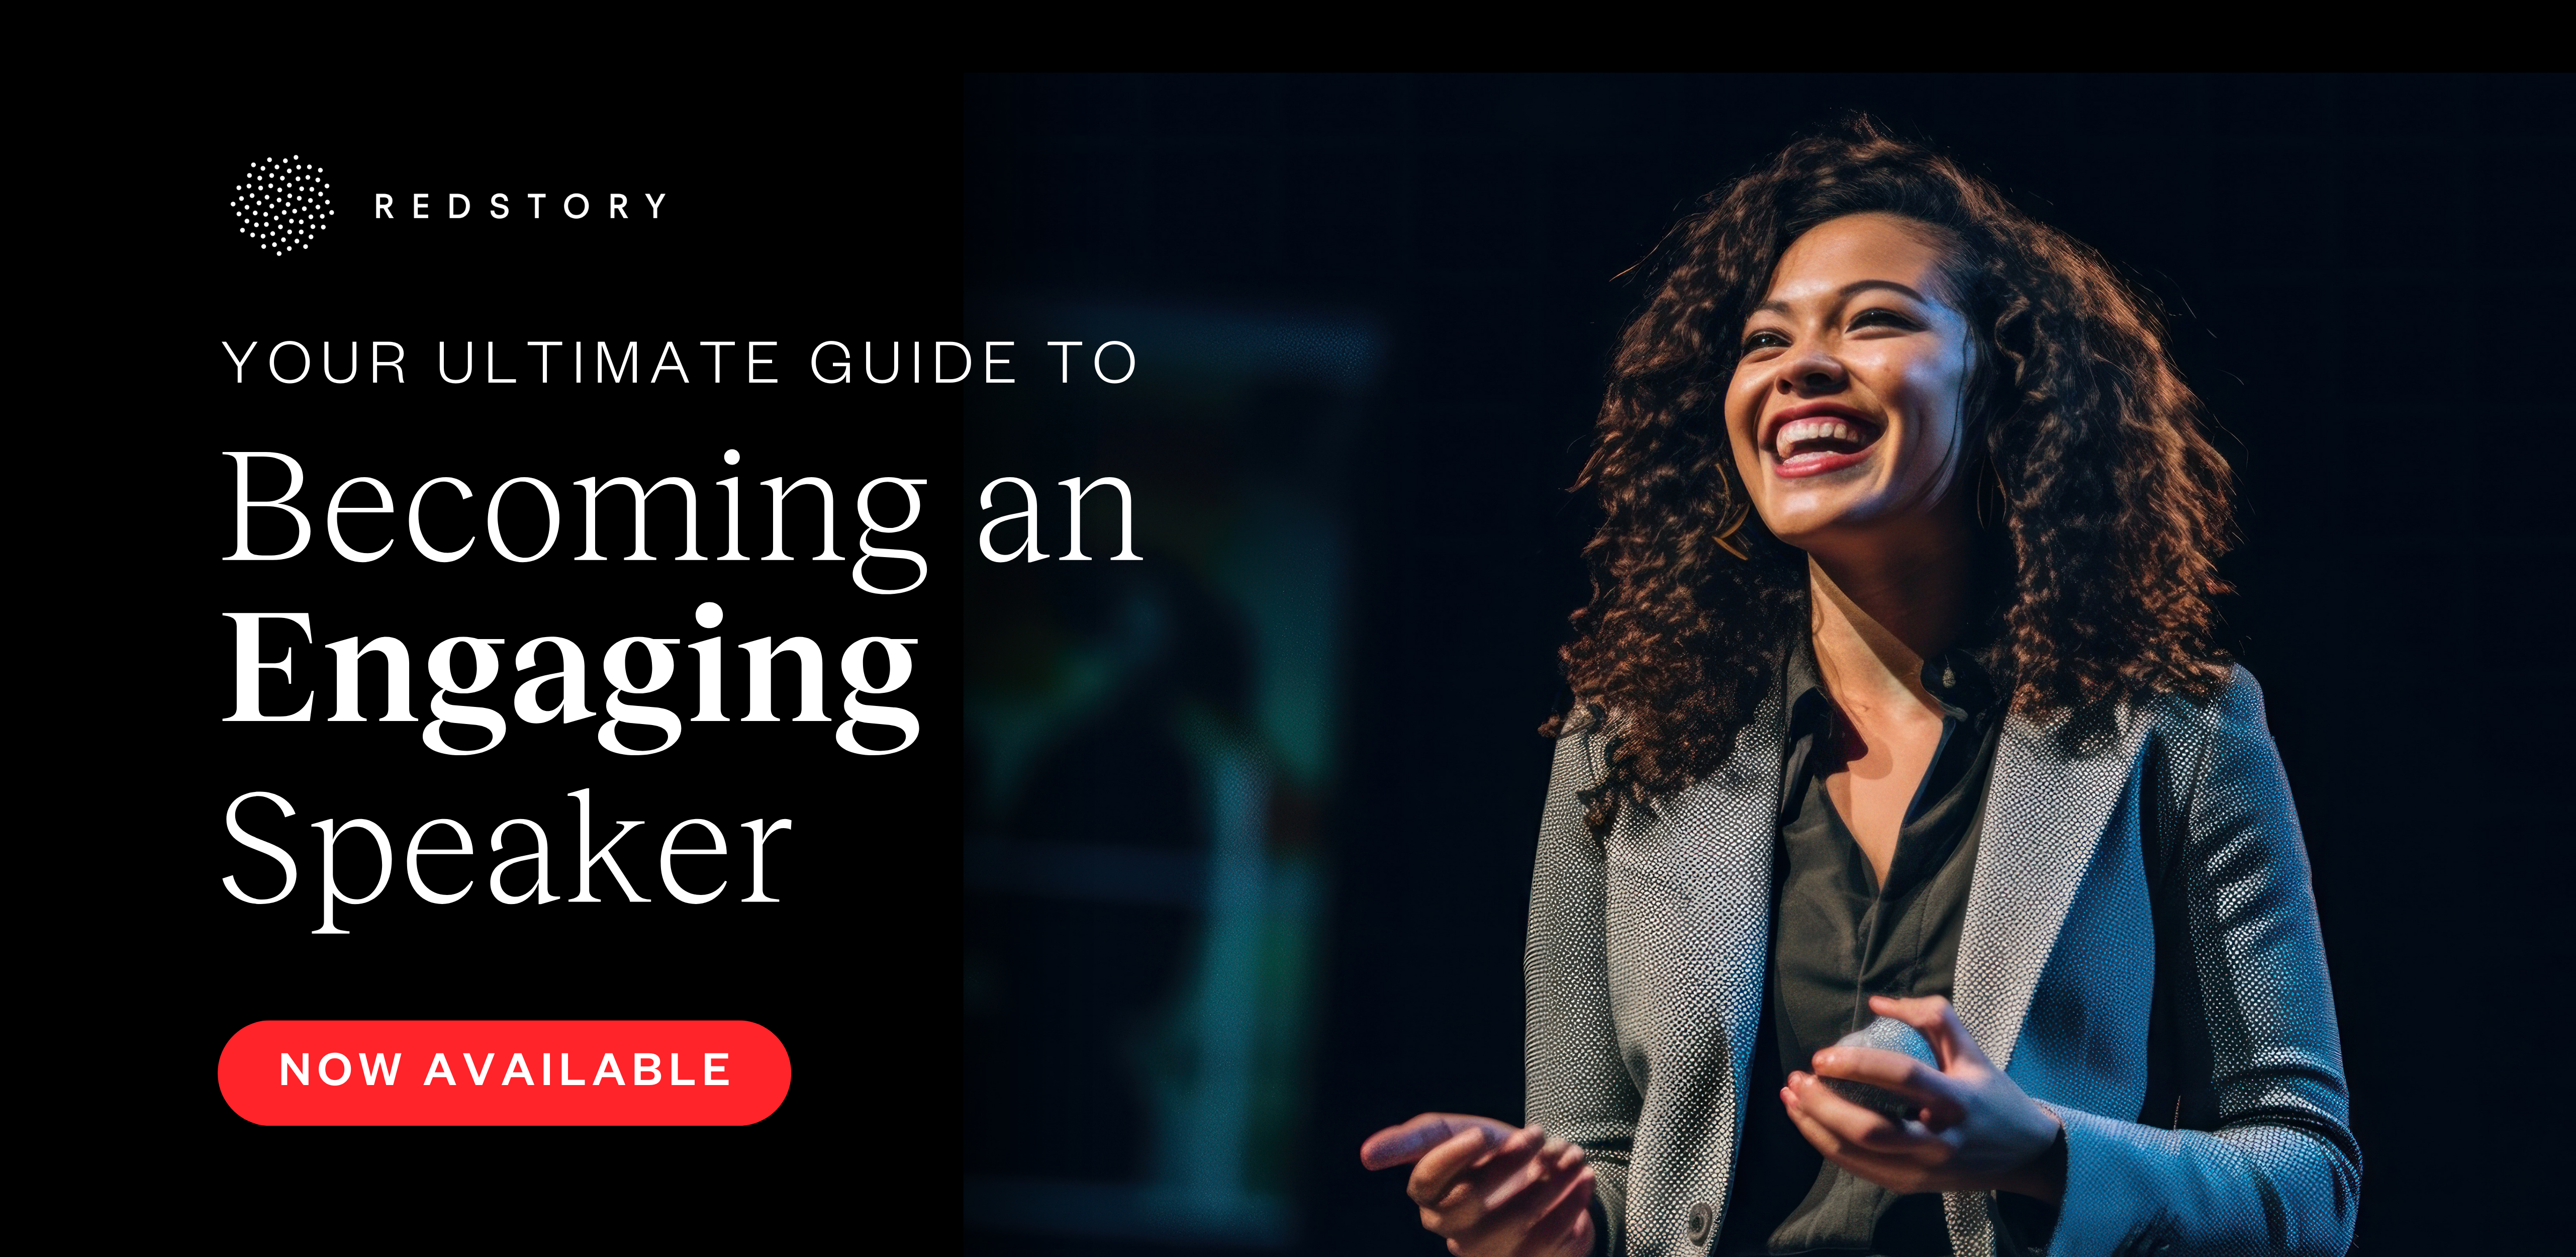 Download Your Ultimate Guide to Becoming an Engaging Speaker